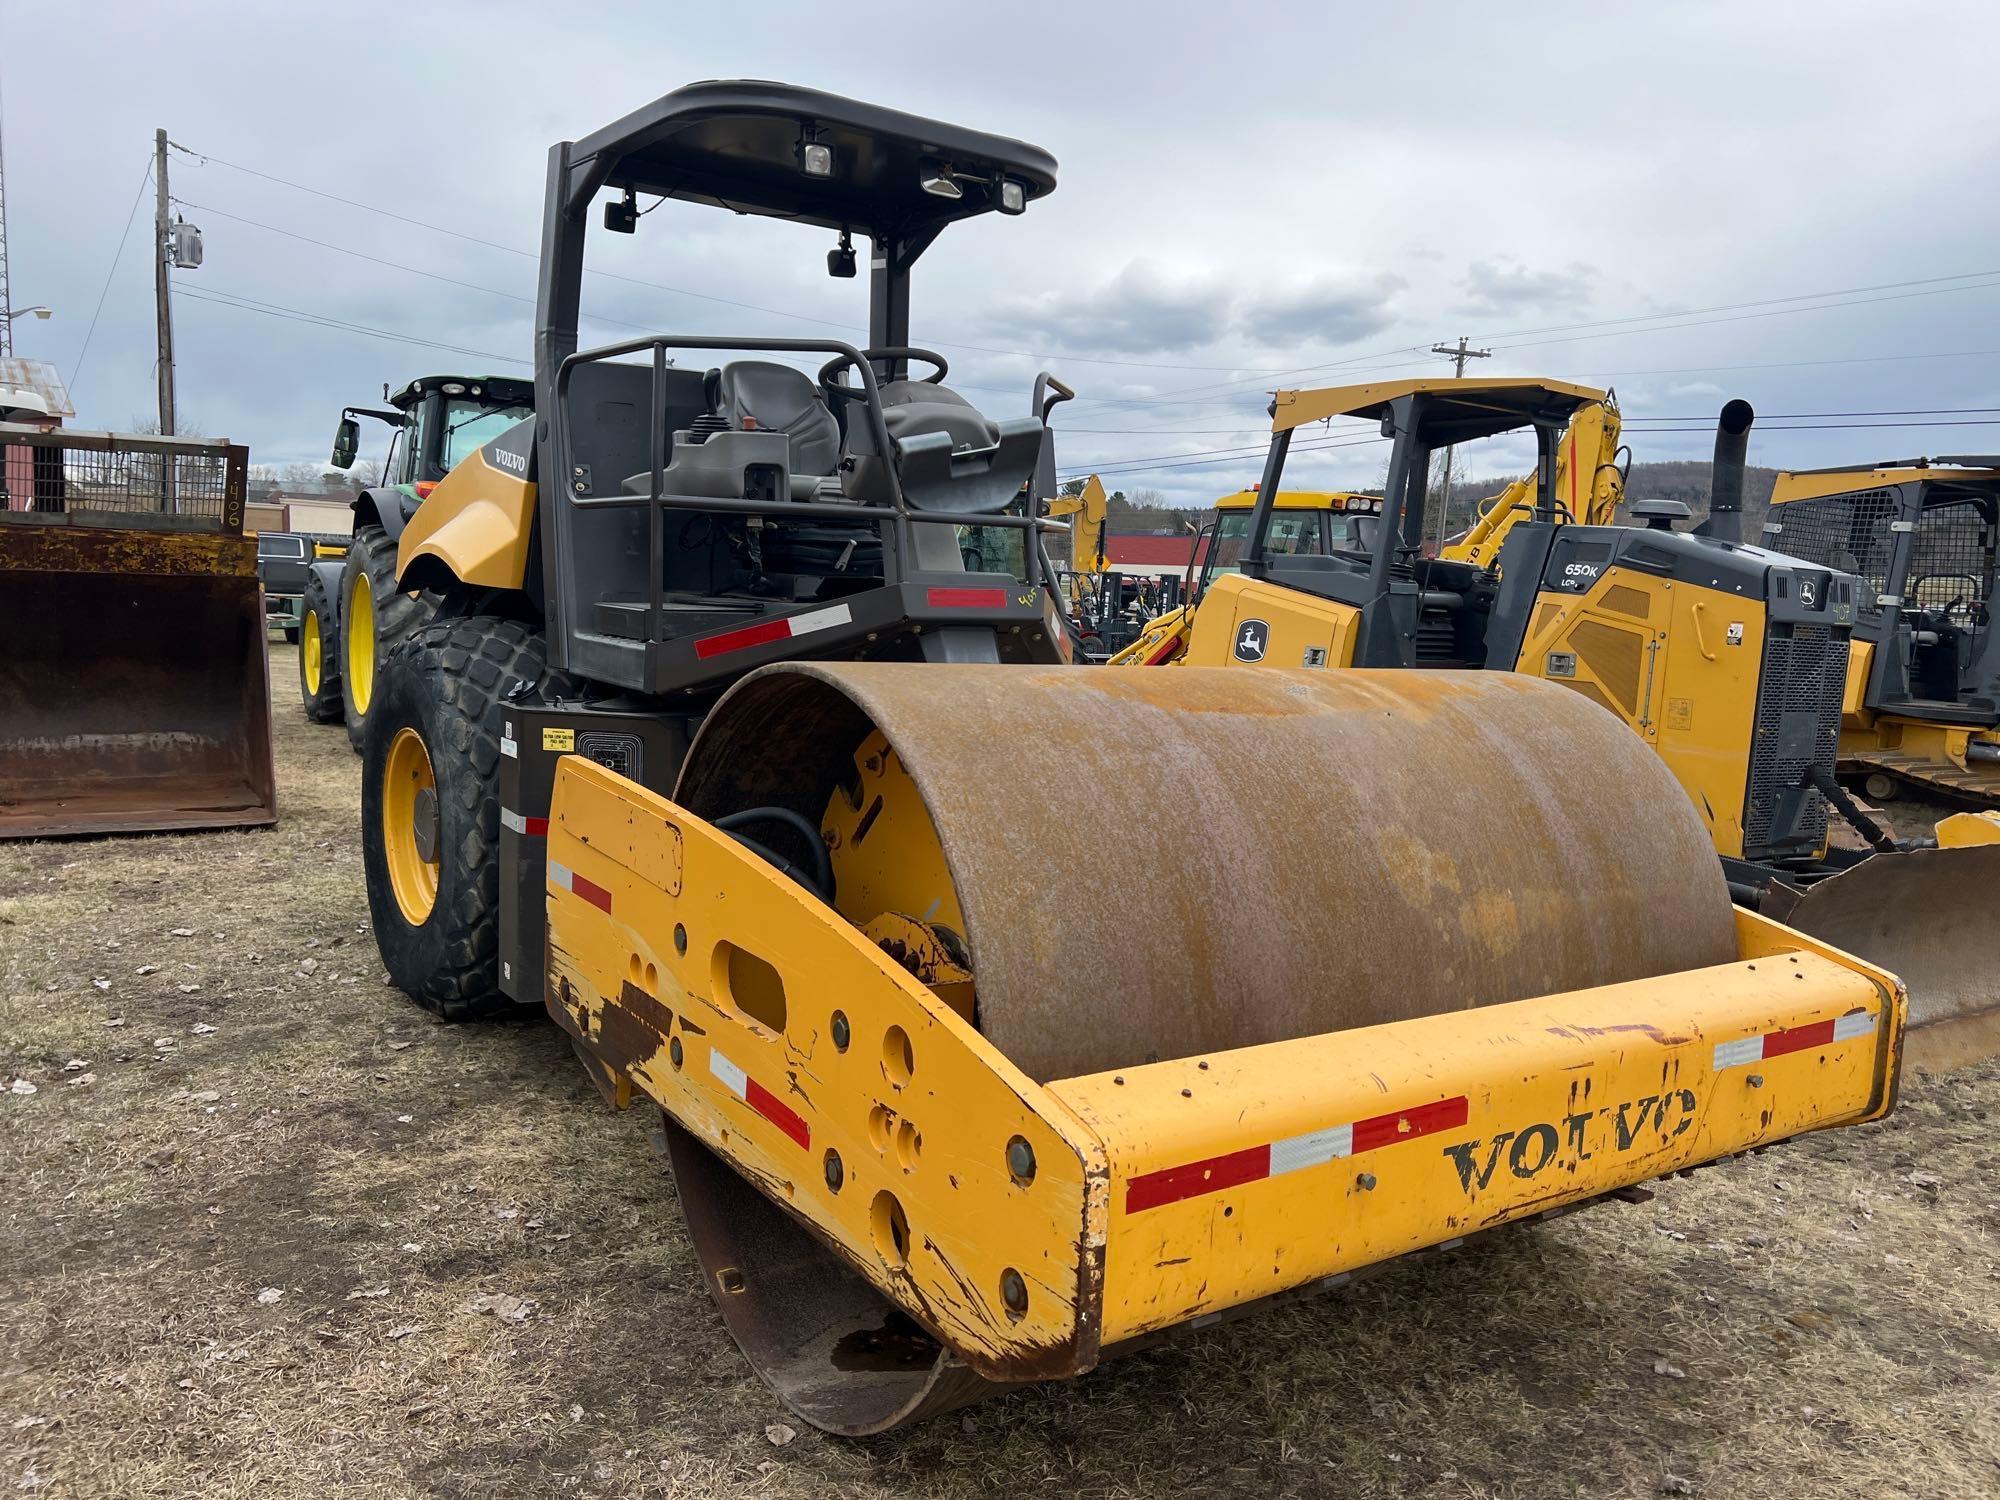 2014 VOLVO SD115 VIBRATORY ROLLER SN:235067 powered by Cummins diesel engine, equipped with OROPS,